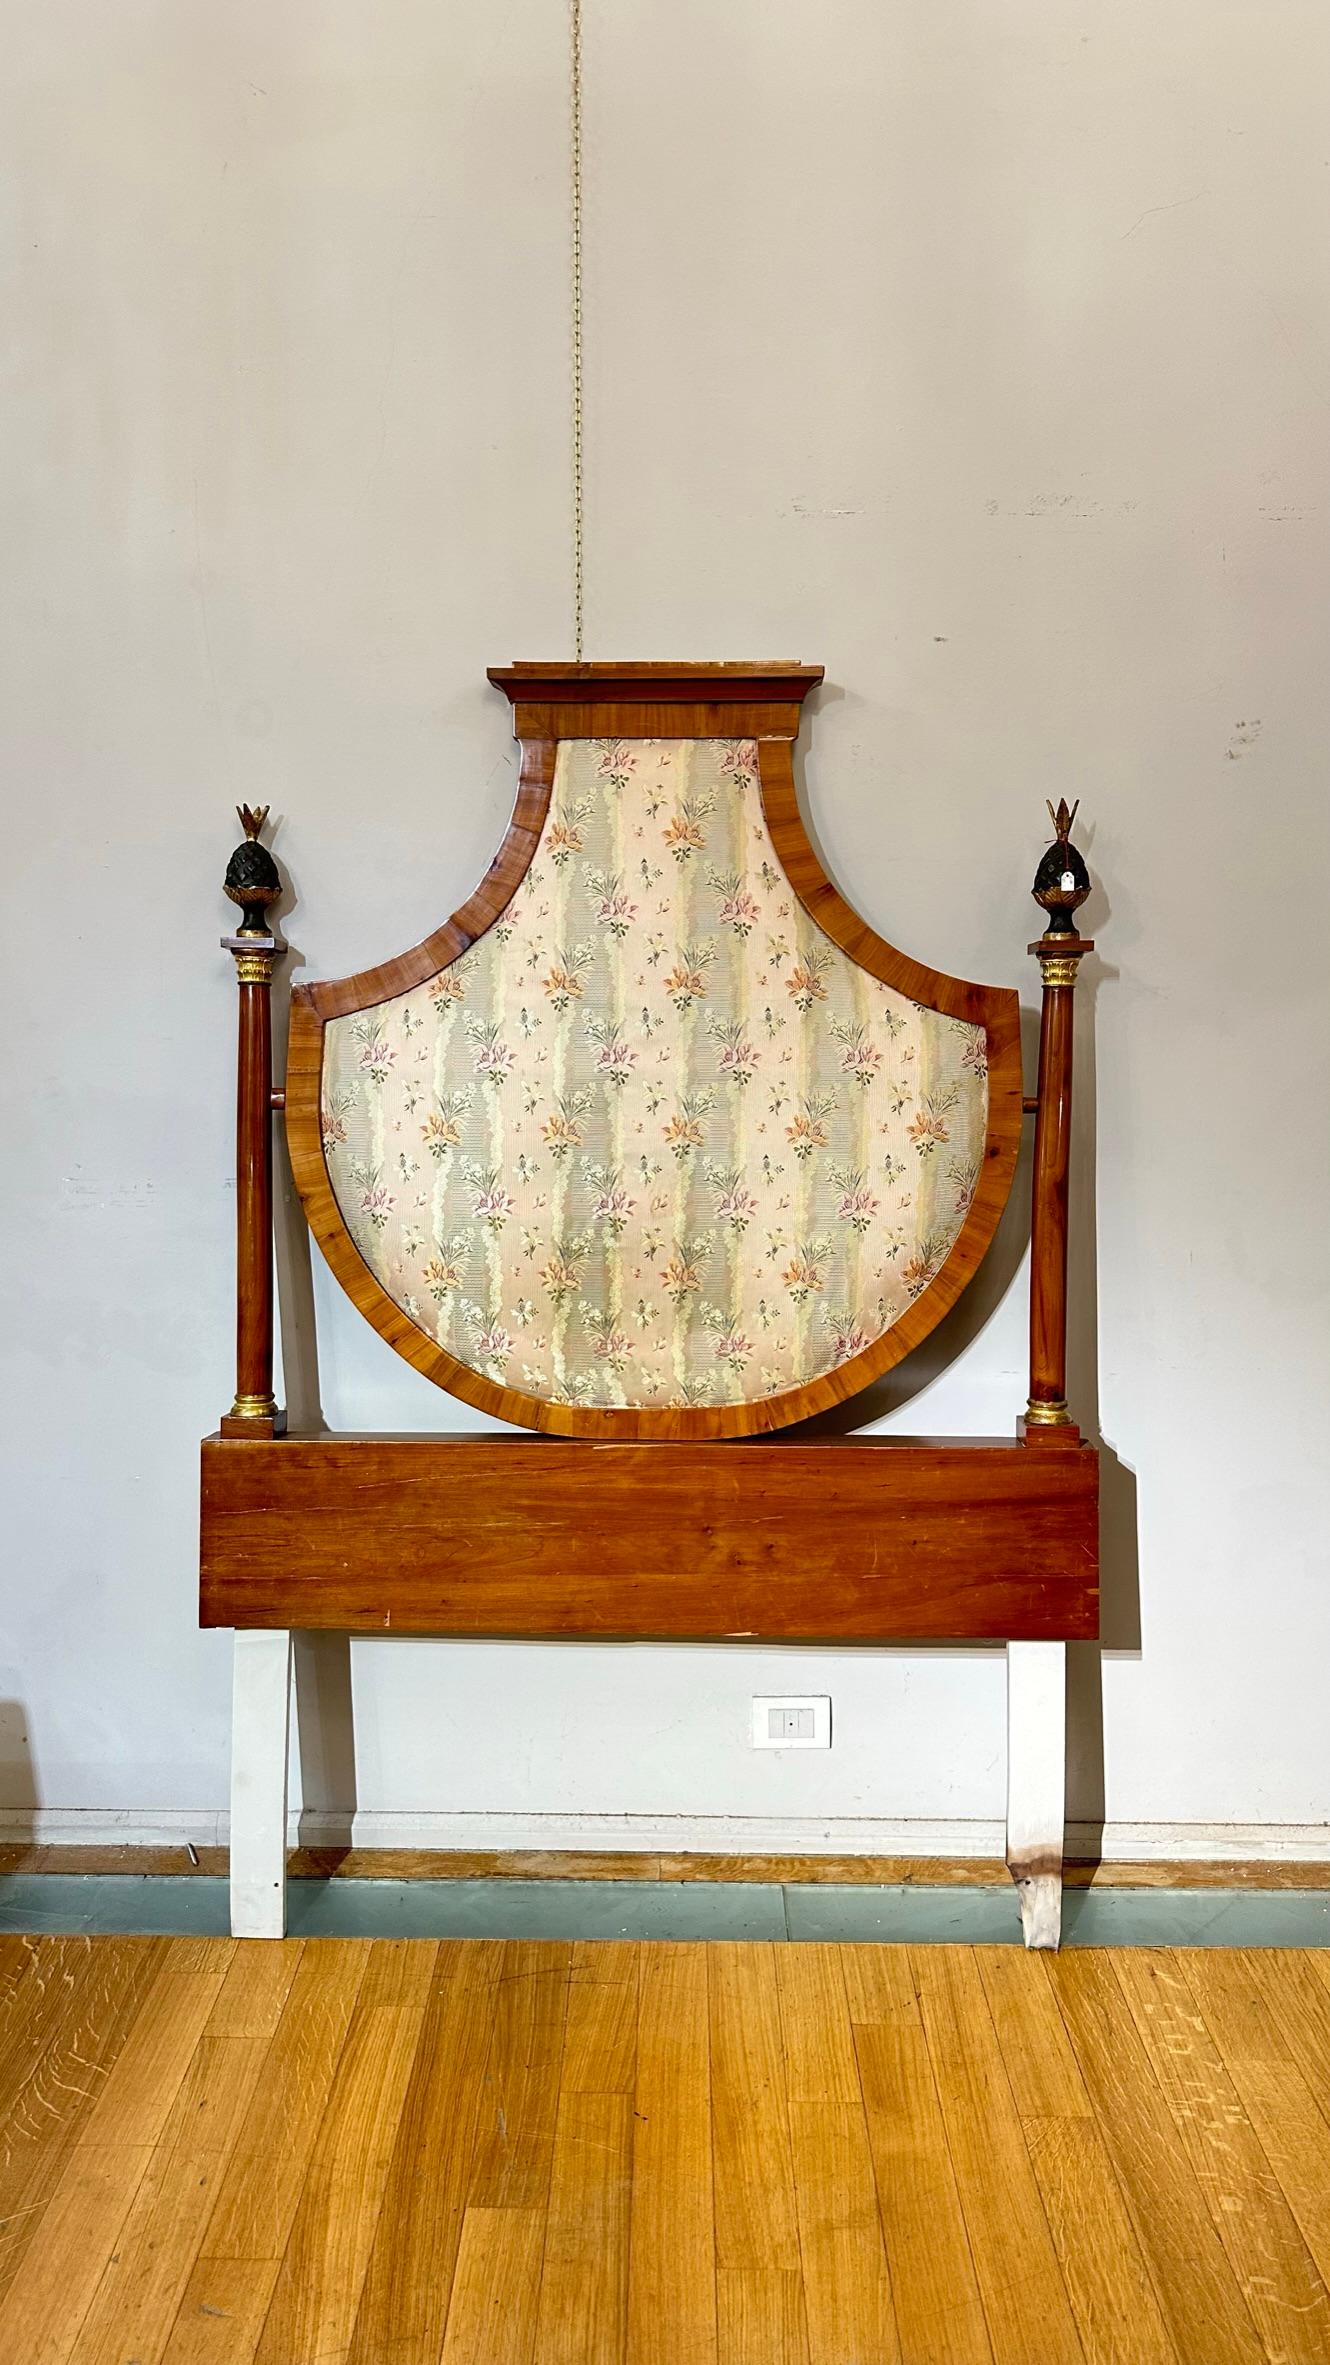 This beautiful Empire period shield headboard, dating to around 1810, is a masterpiece of craftsmanship made entirely of cherry wood. The gilded and carved wood finishes give a touch of elegance and refinement to its design. The headboard has been